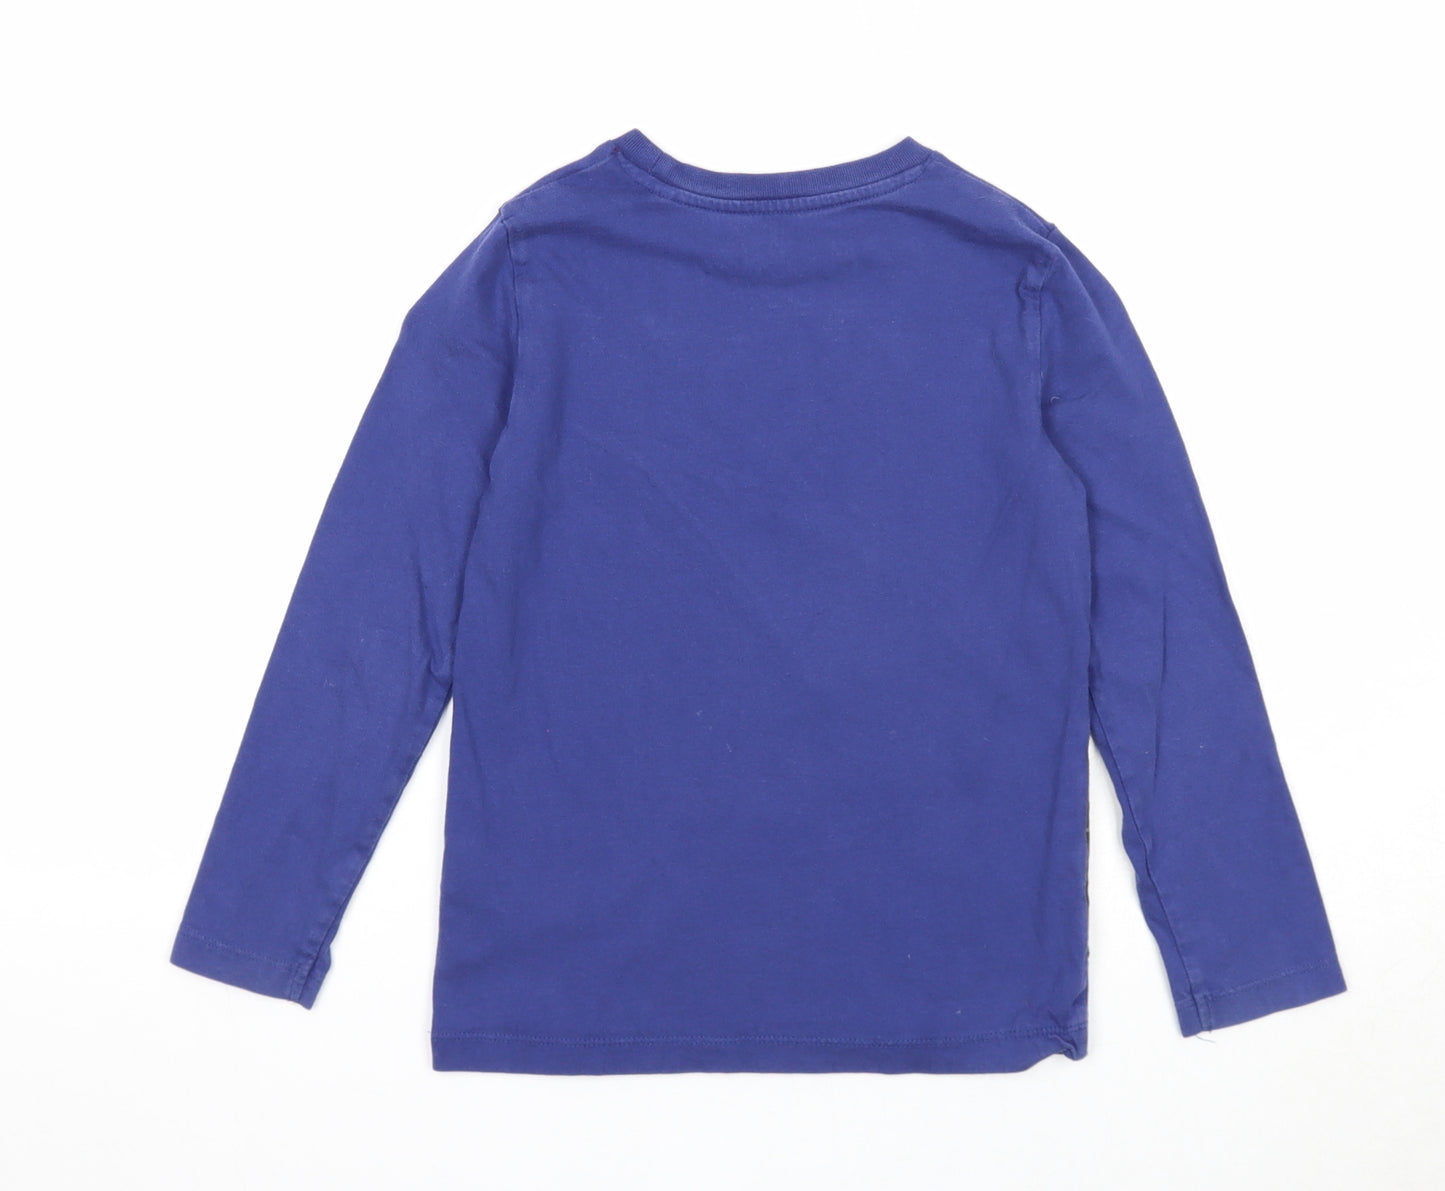 Mini Boden Boys Blue Cotton Basic T-Shirt Size 6-7 Years Round Neck Pullover - Reindeer Christmas